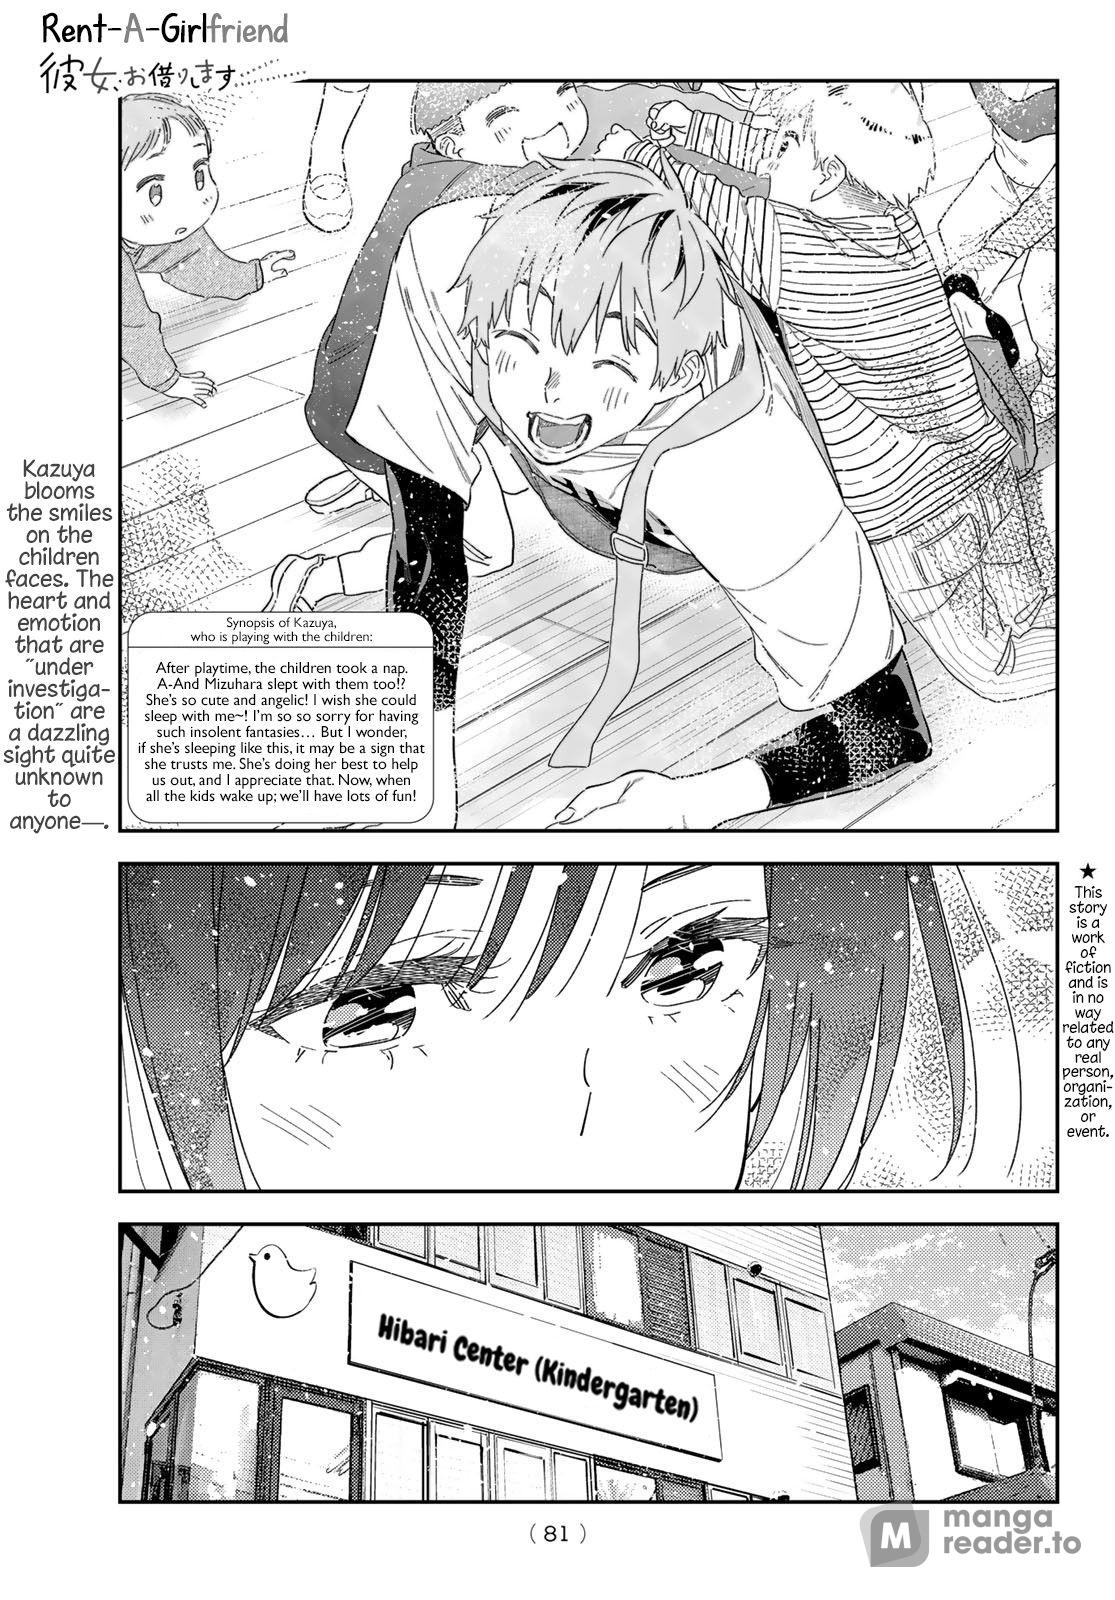 Rent-A-Girlfriend, Chapter 296 image 01